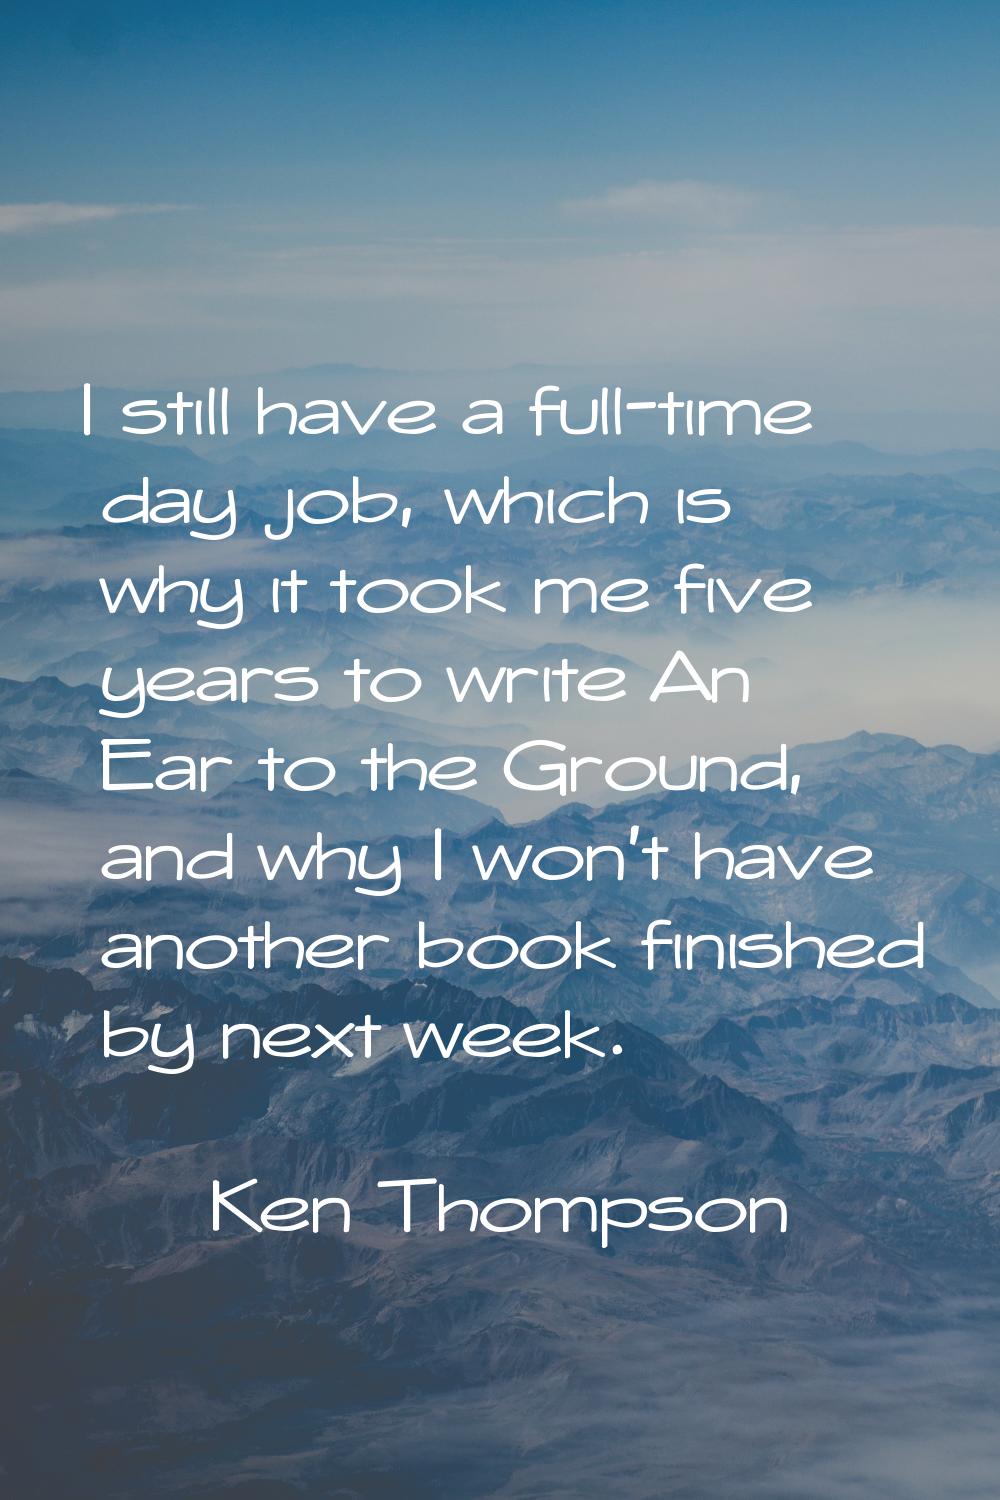 I still have a full-time day job, which is why it took me five years to write An Ear to the Ground,